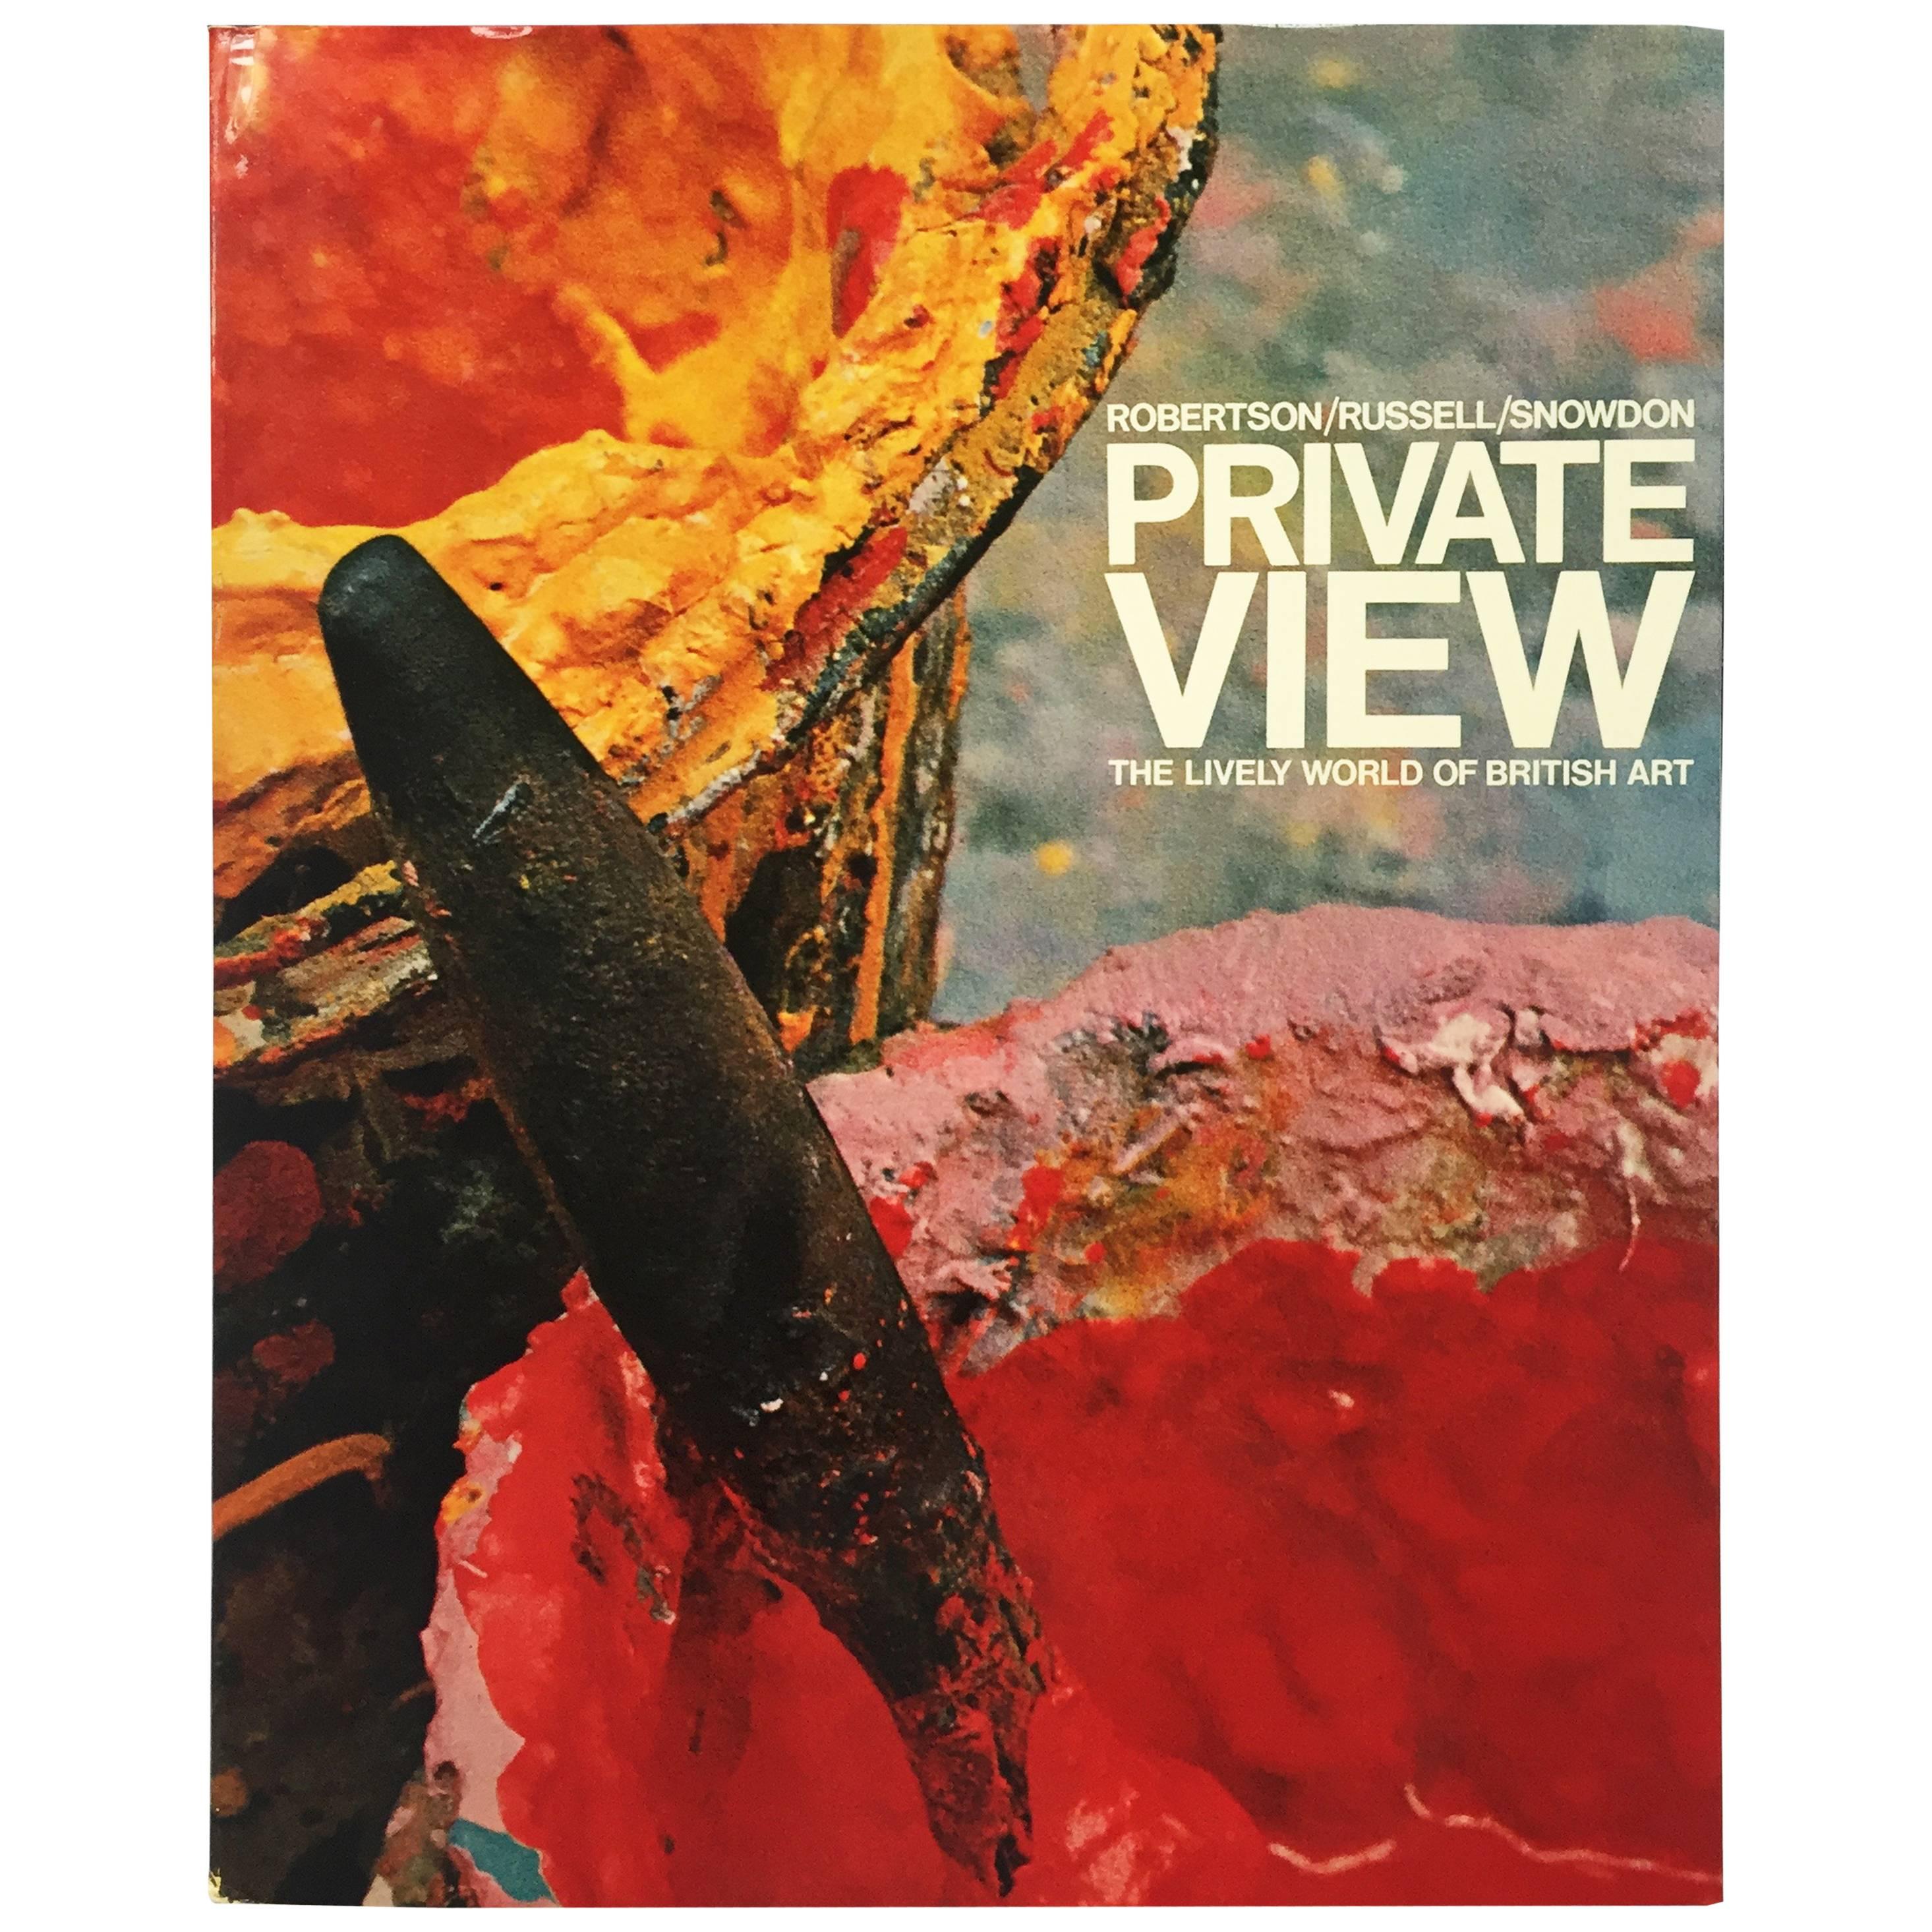 Robertson, Russell, Snowdon, Private View, the Lively World of British Art, 1965